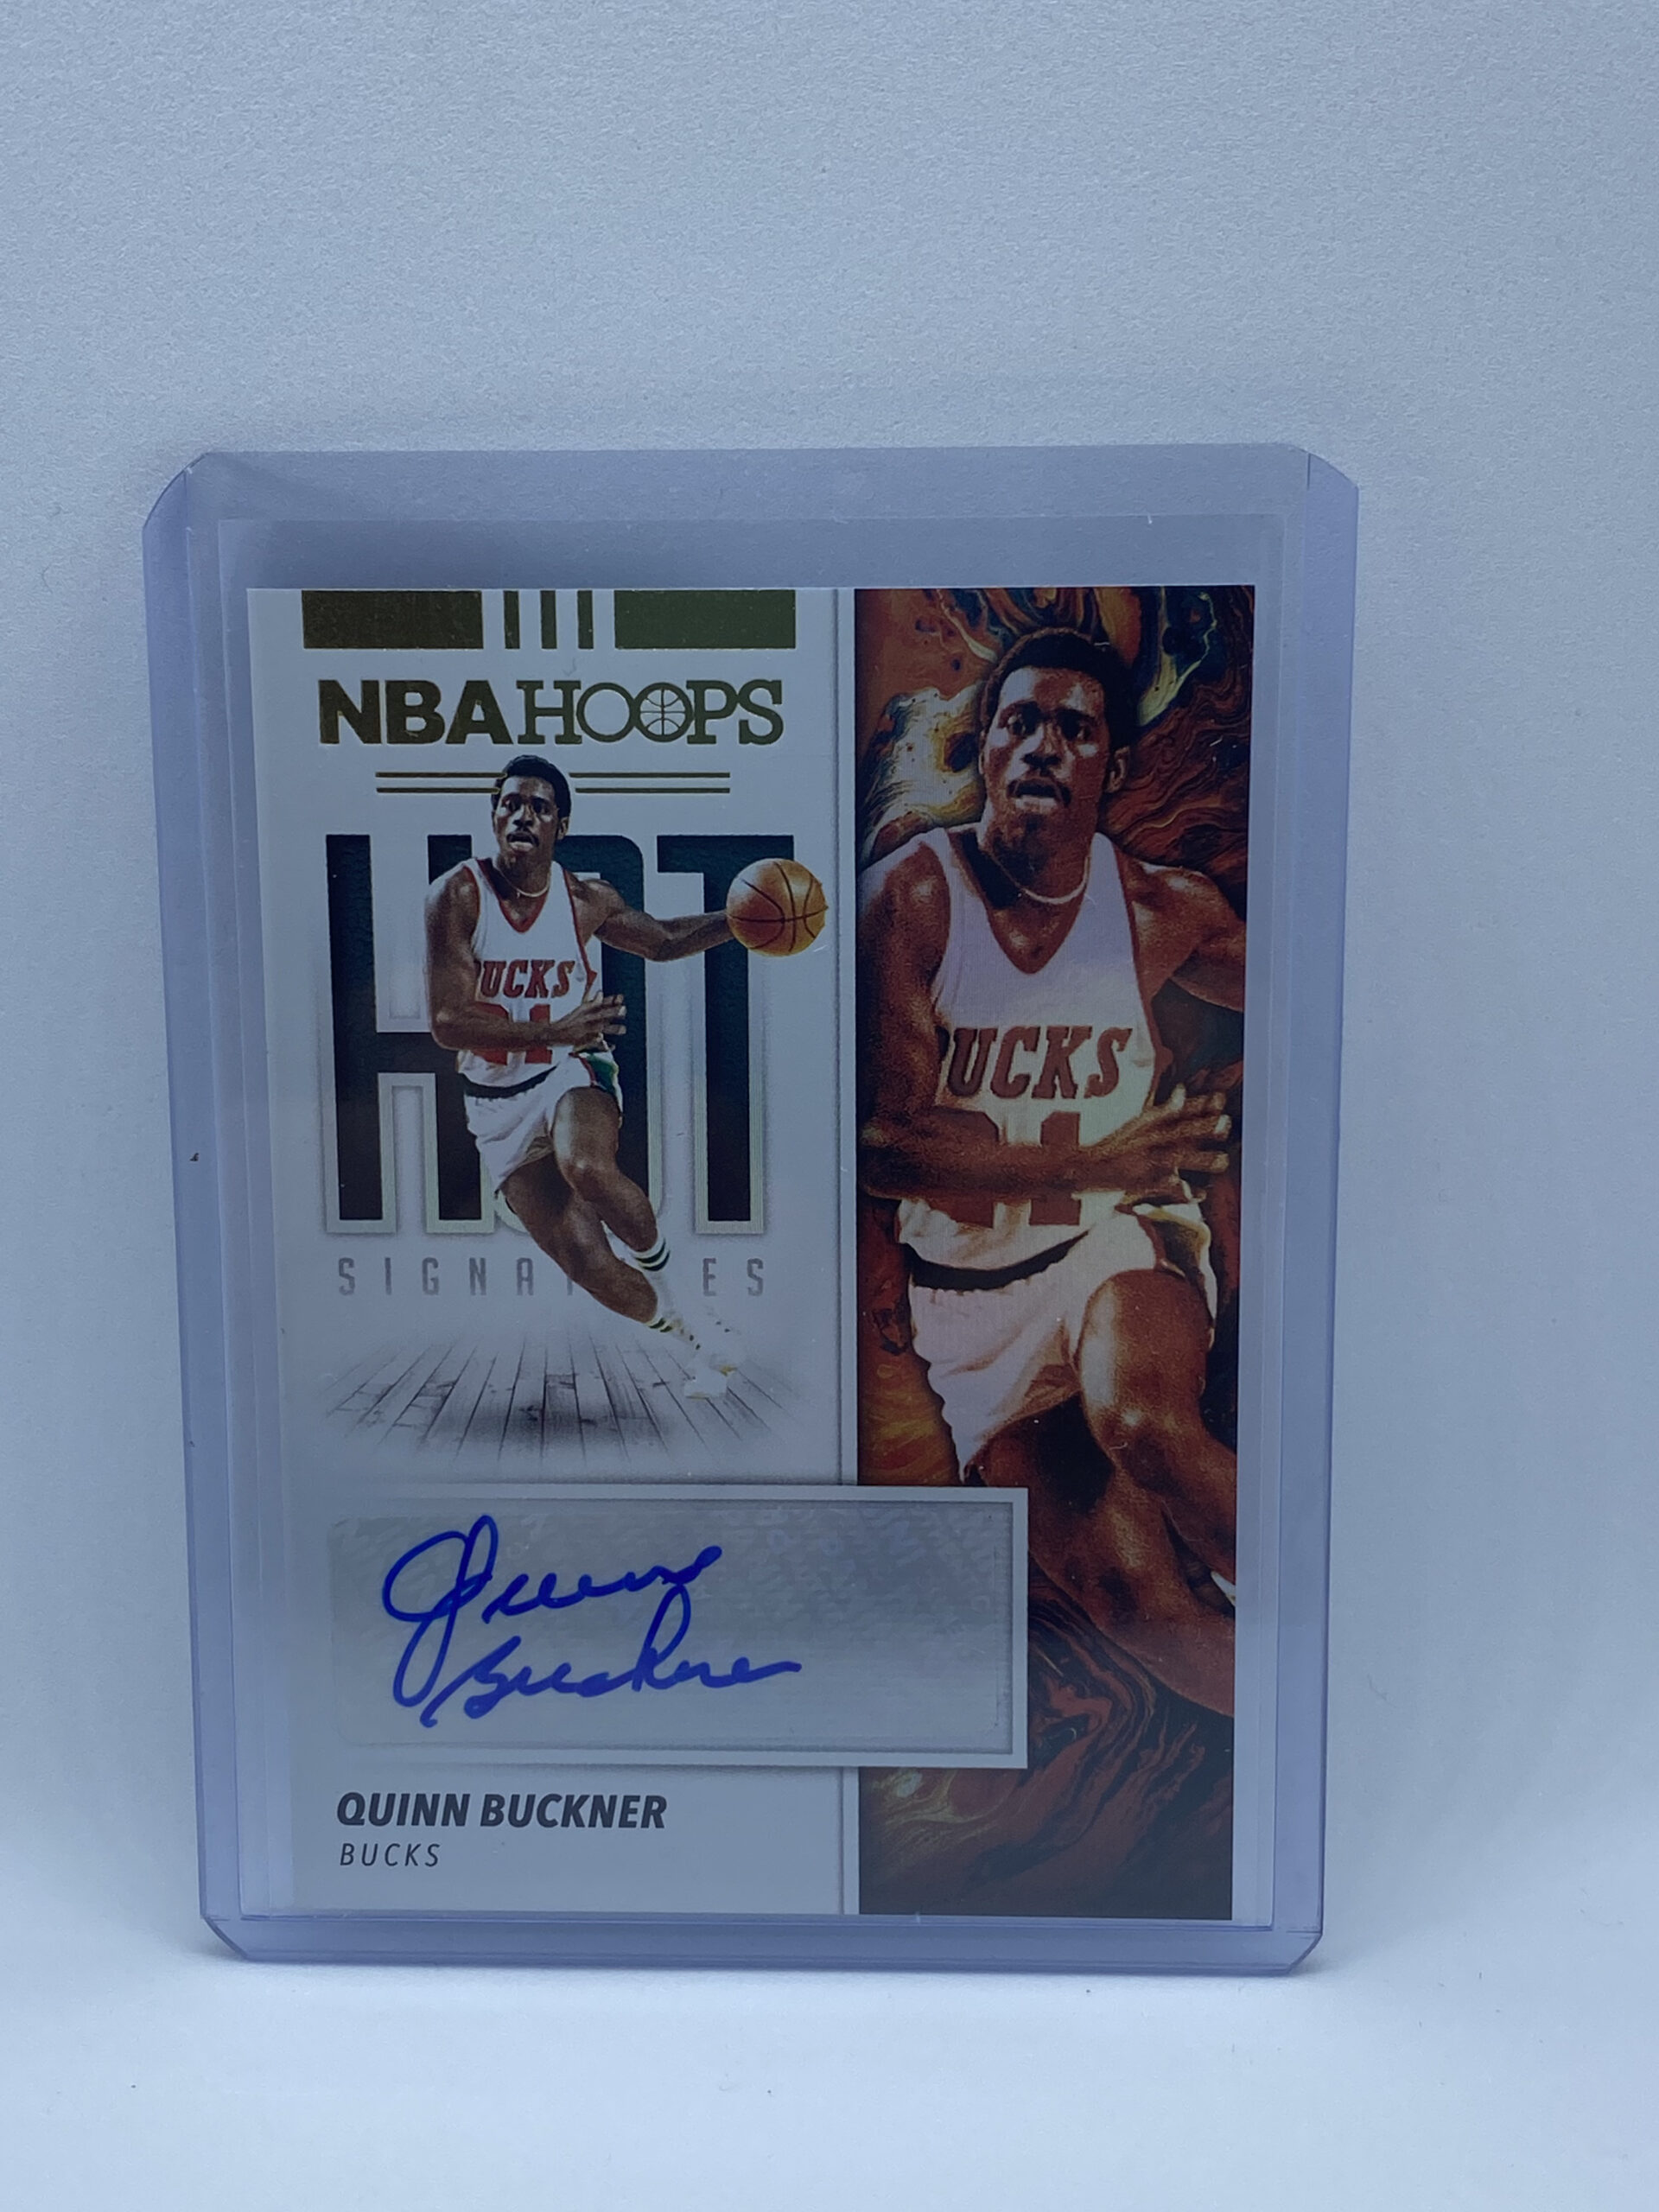 2019-20 NBA HOOPS HOT SIGNATURES MILWAUKEE BUCKS QUINN BUCKNER AUTOGRAPH CARD - Owls Collectibles - Trusted American Sports Cards & Toy Supplier Located In Delray Beach, Florida